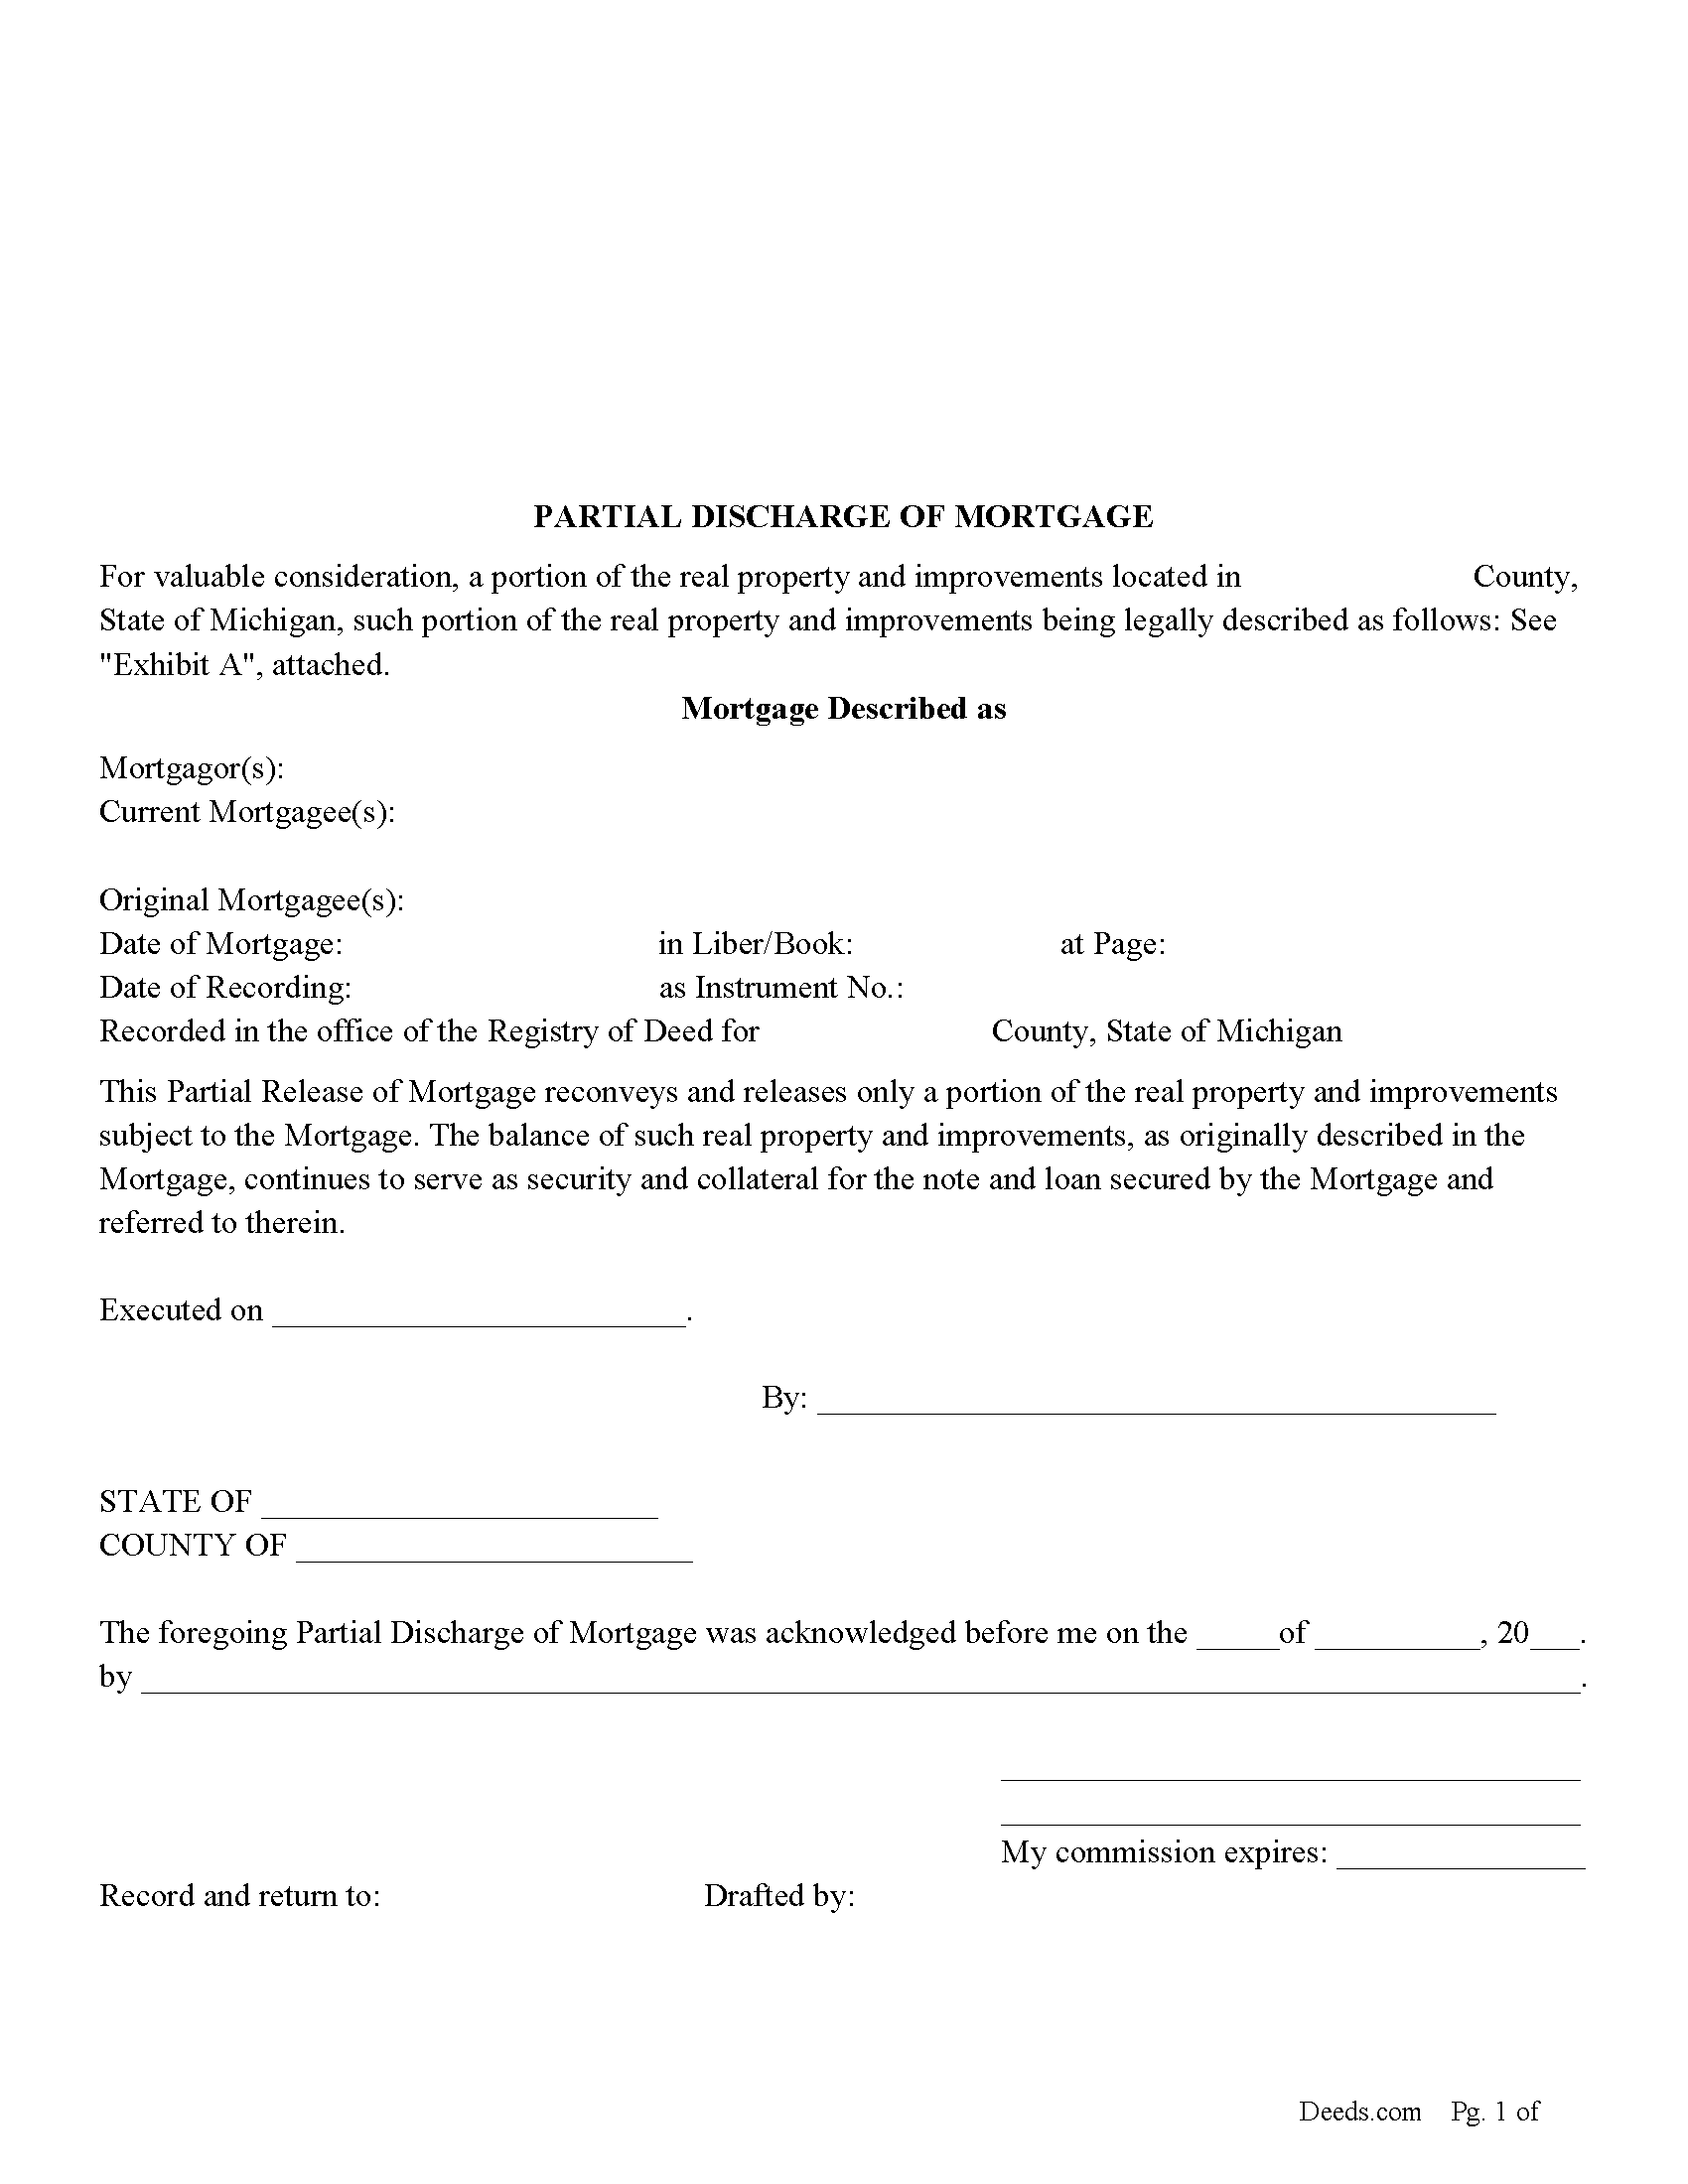 Partial Discharge of Mortgage Form